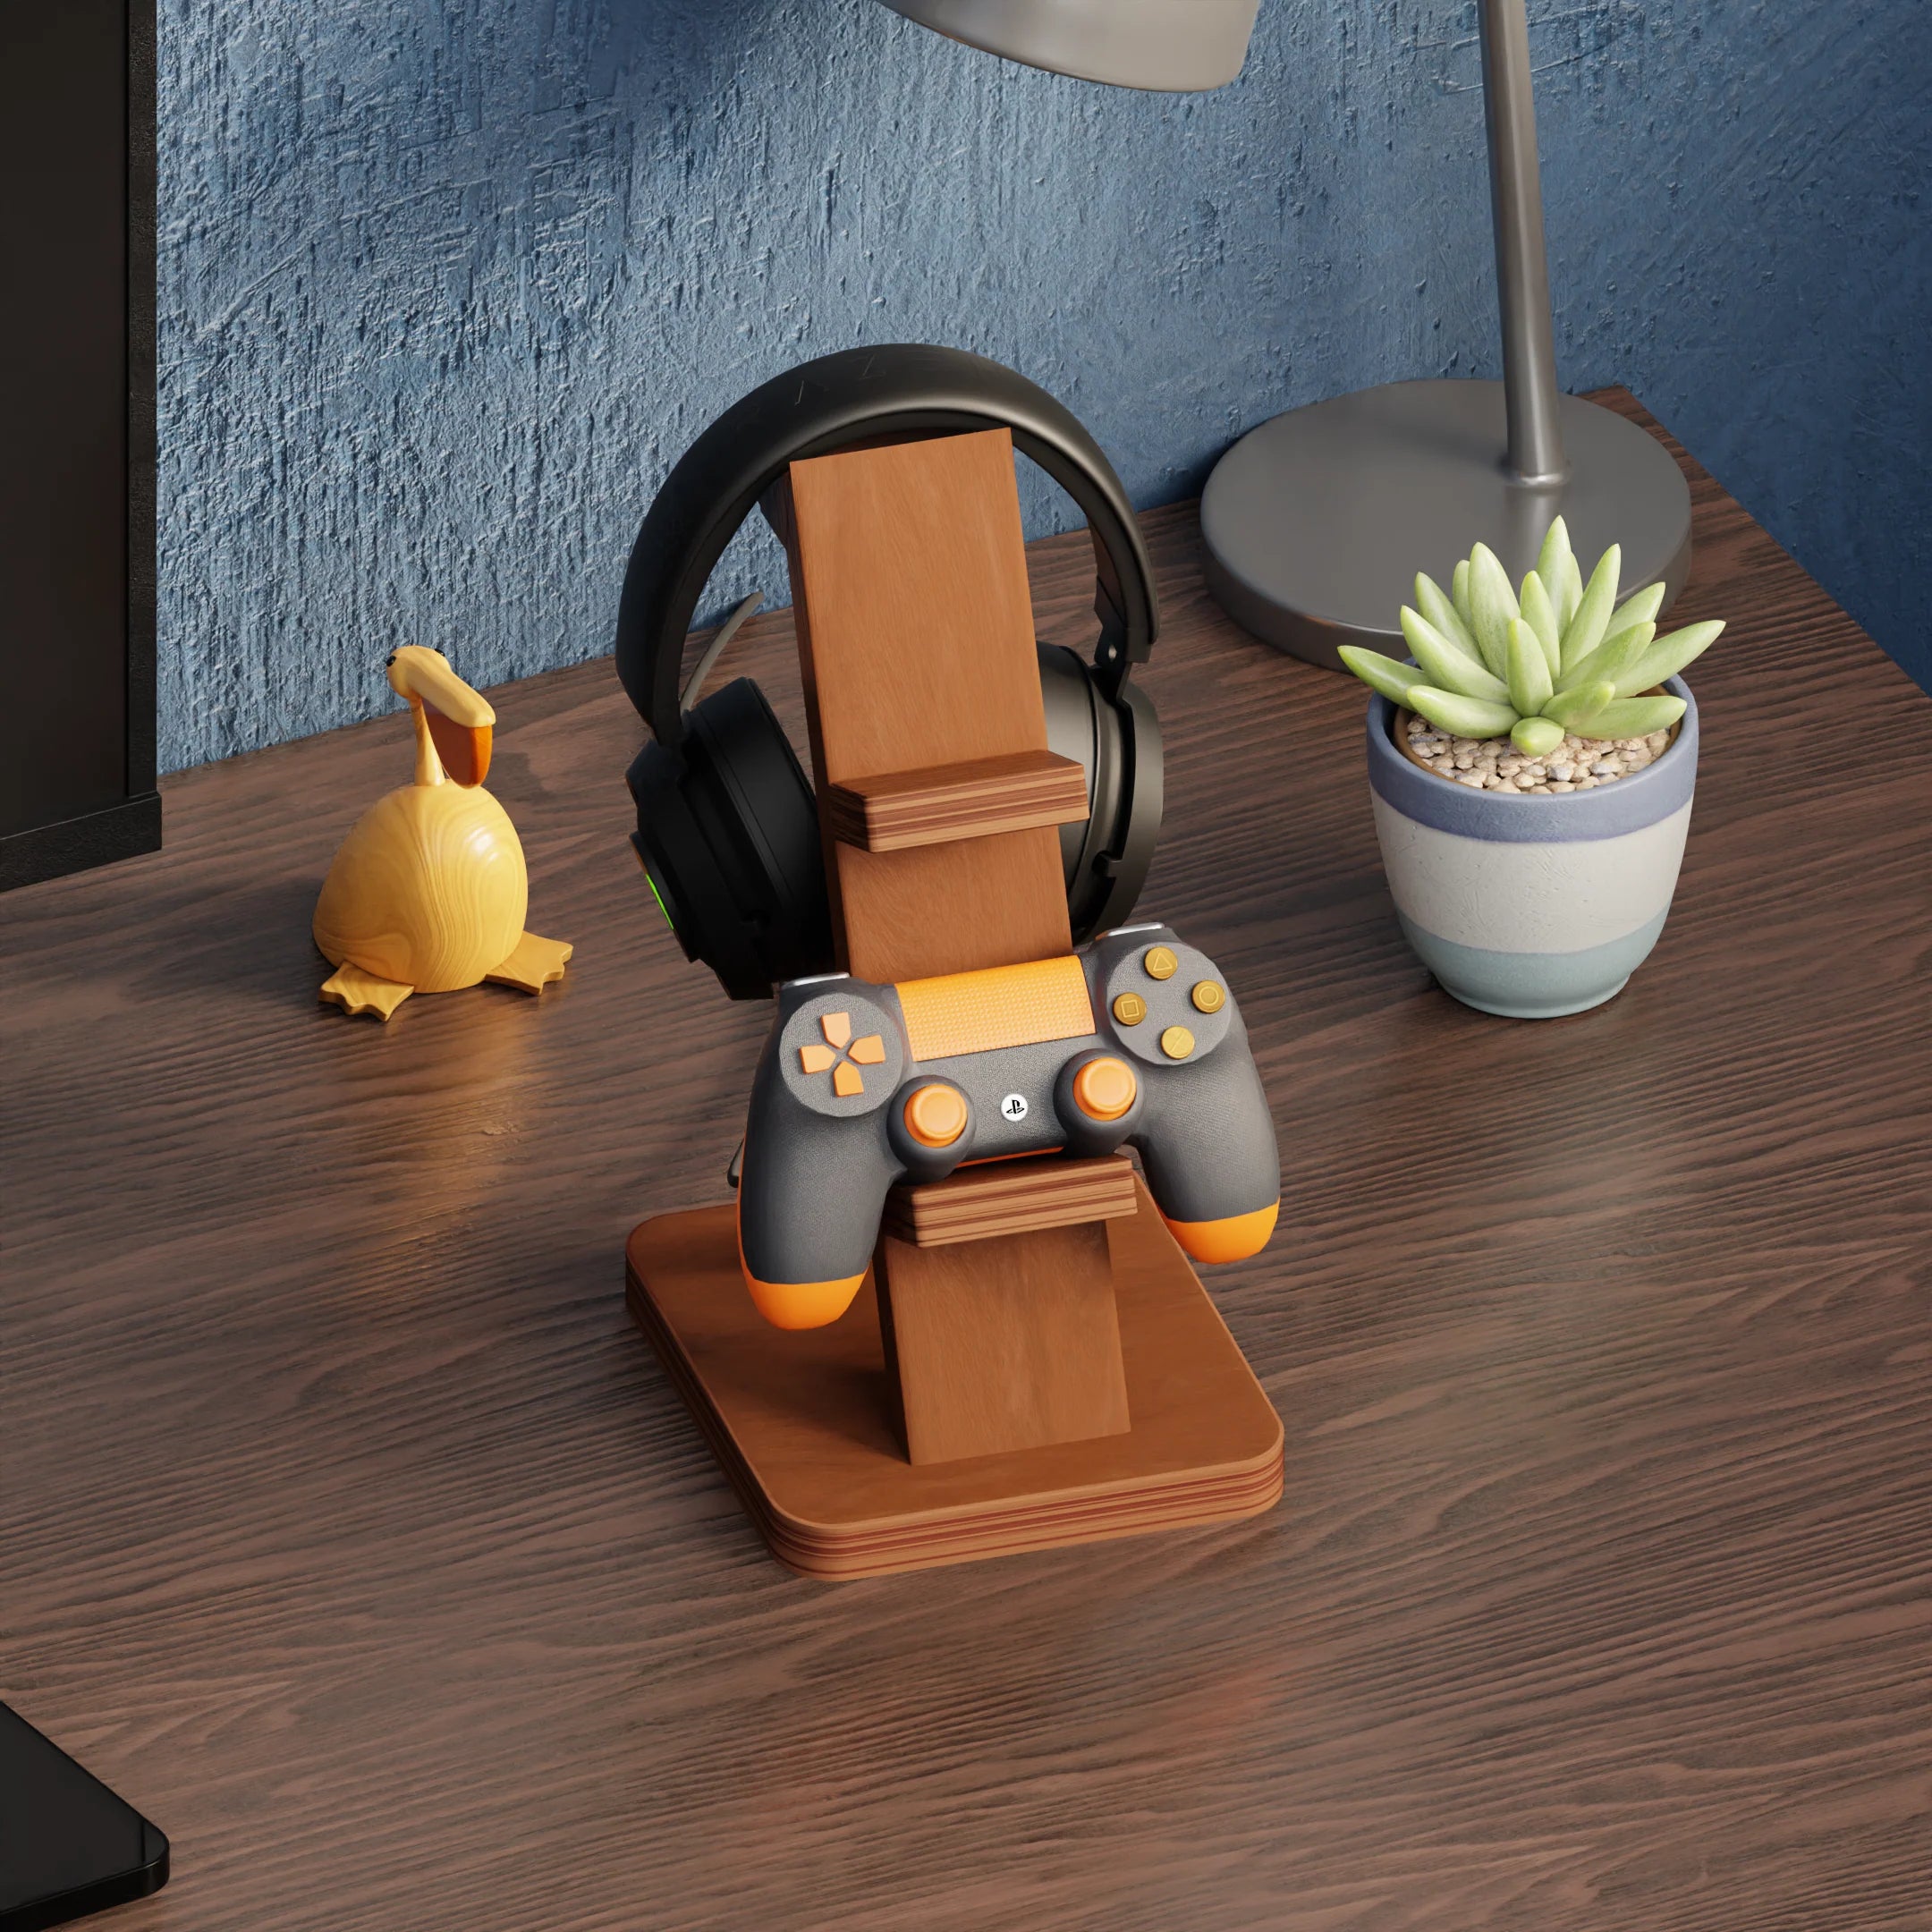 Wooden headphone stand with gaming controller on a desk.